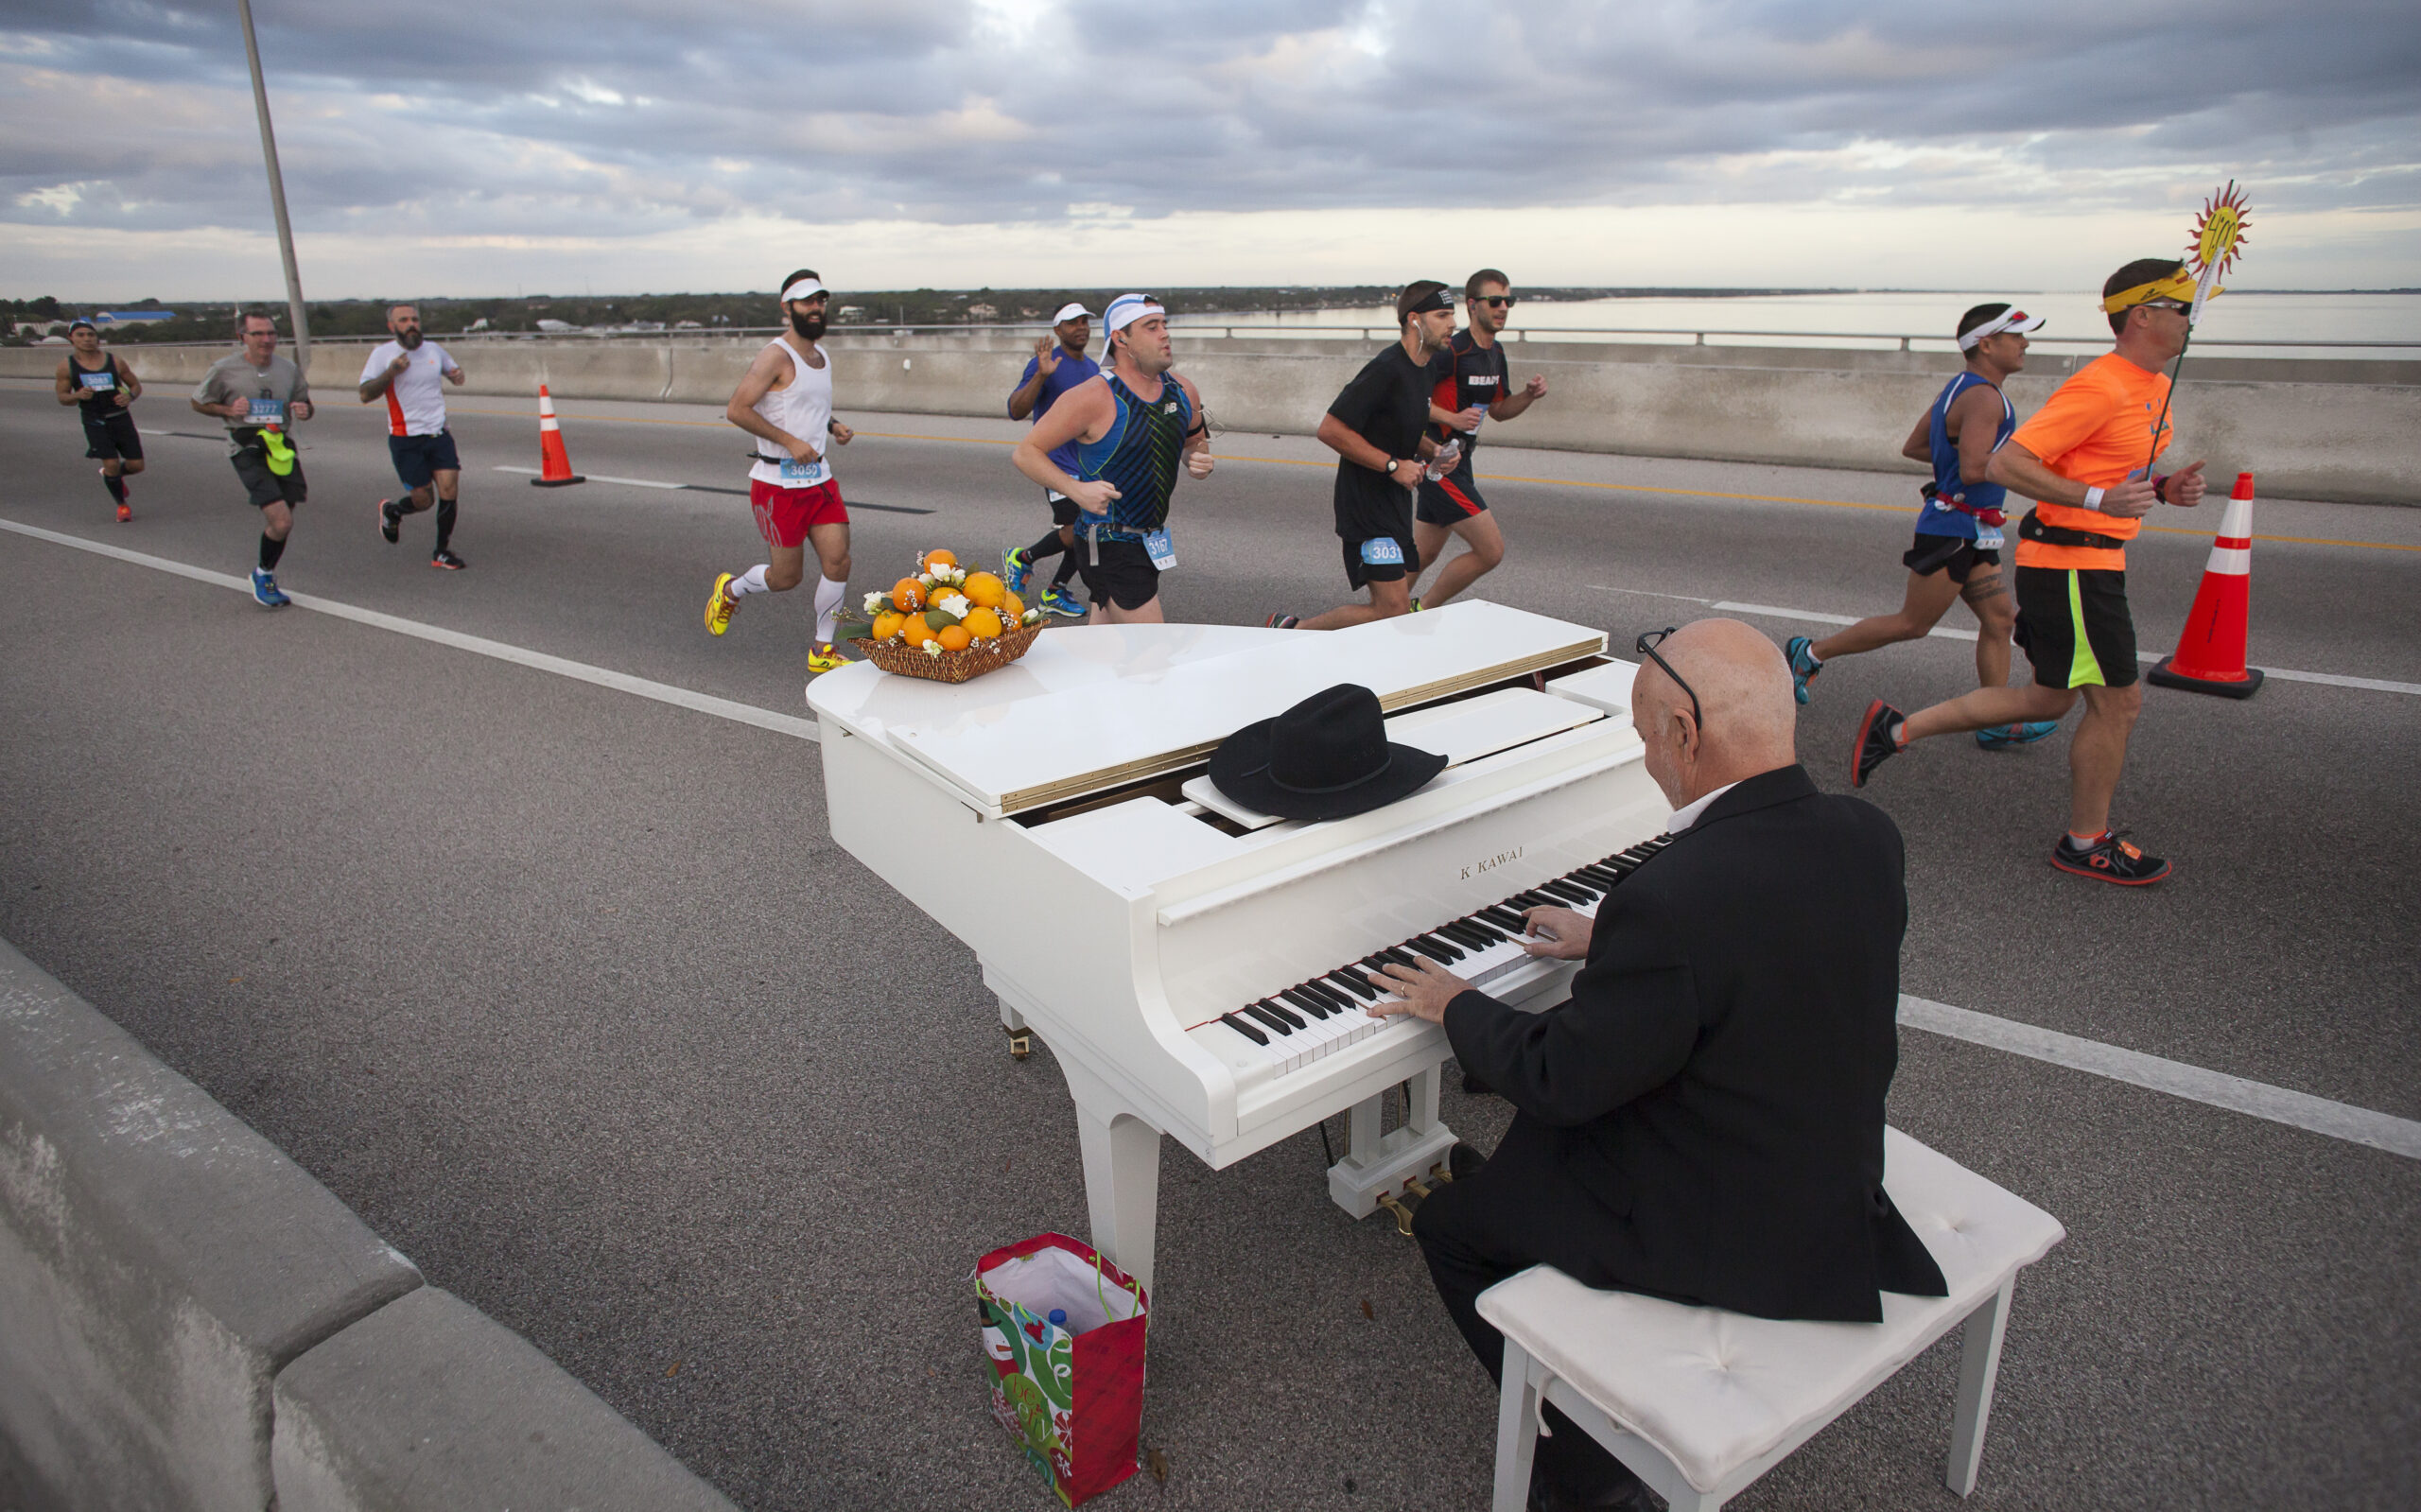 A piano player playing songs for runners in the Publix Florida Marathon in Melbourne, FL